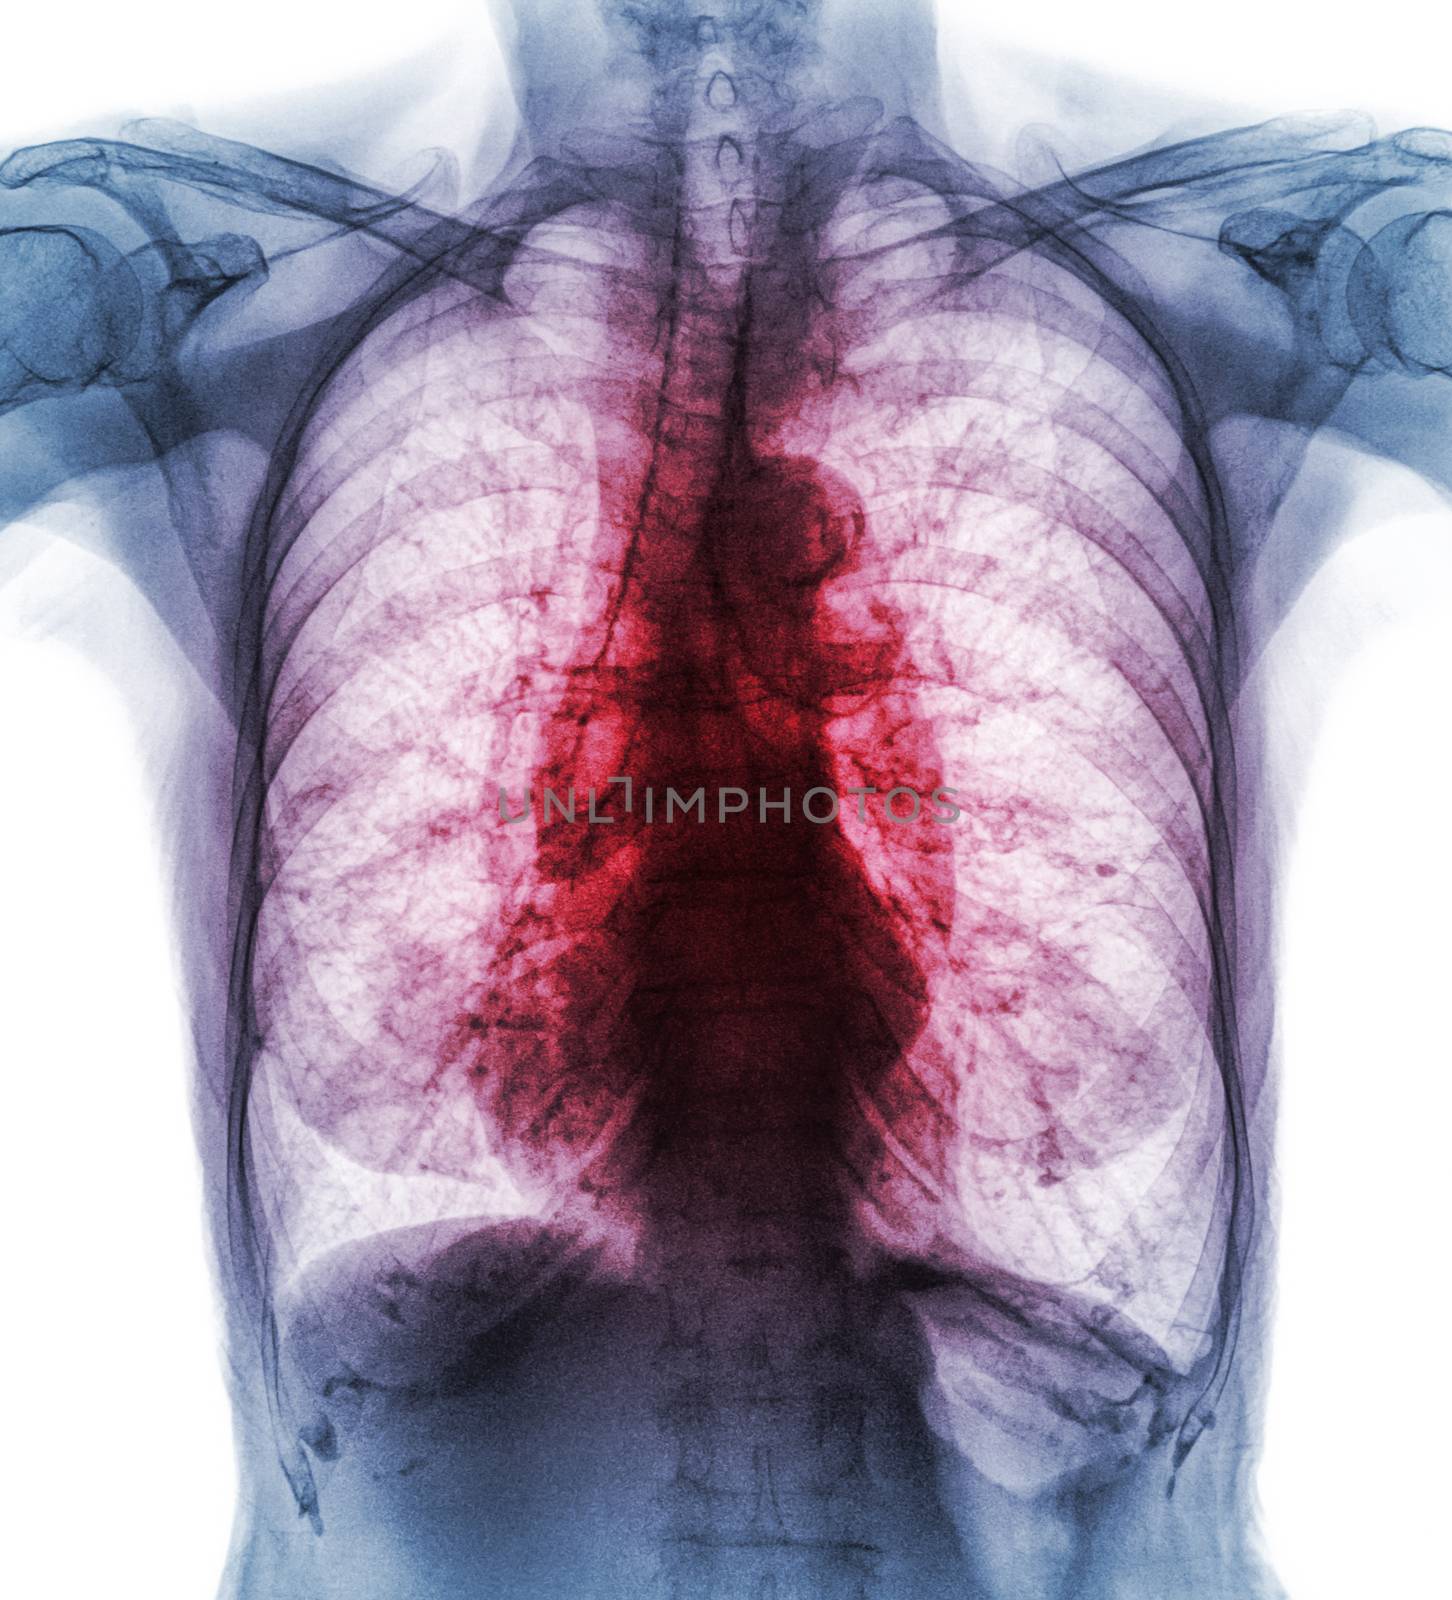 Pulmonary Tuberculosis . Film chest x-ray show interstitial infiltrate both lung due to Mycobacterium tuberculosis infection by stockdevil